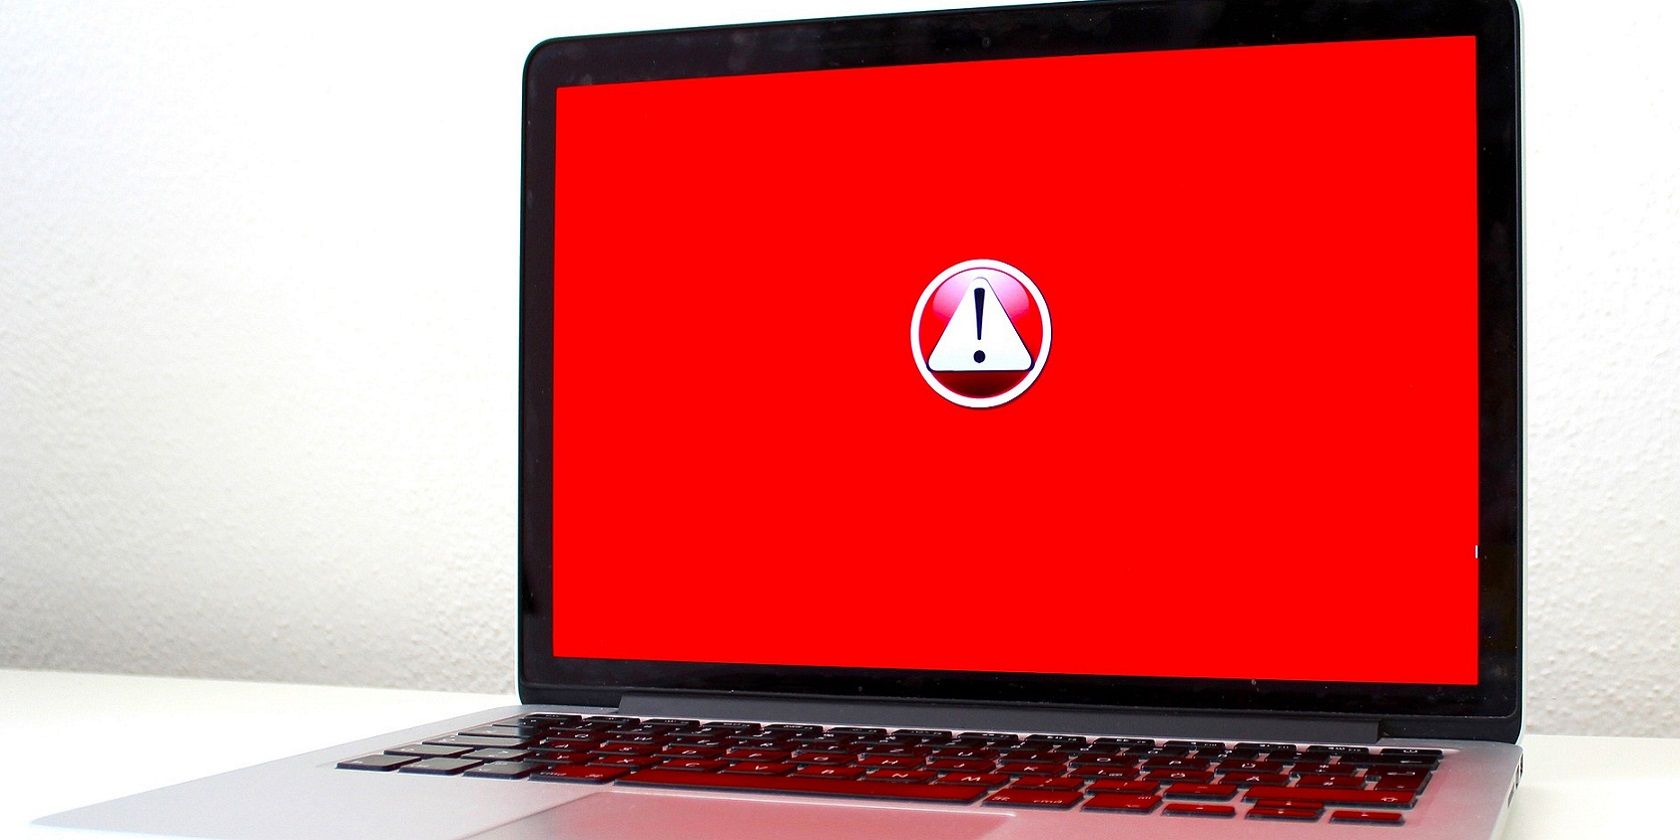 An error exclamation symbol on red laptop